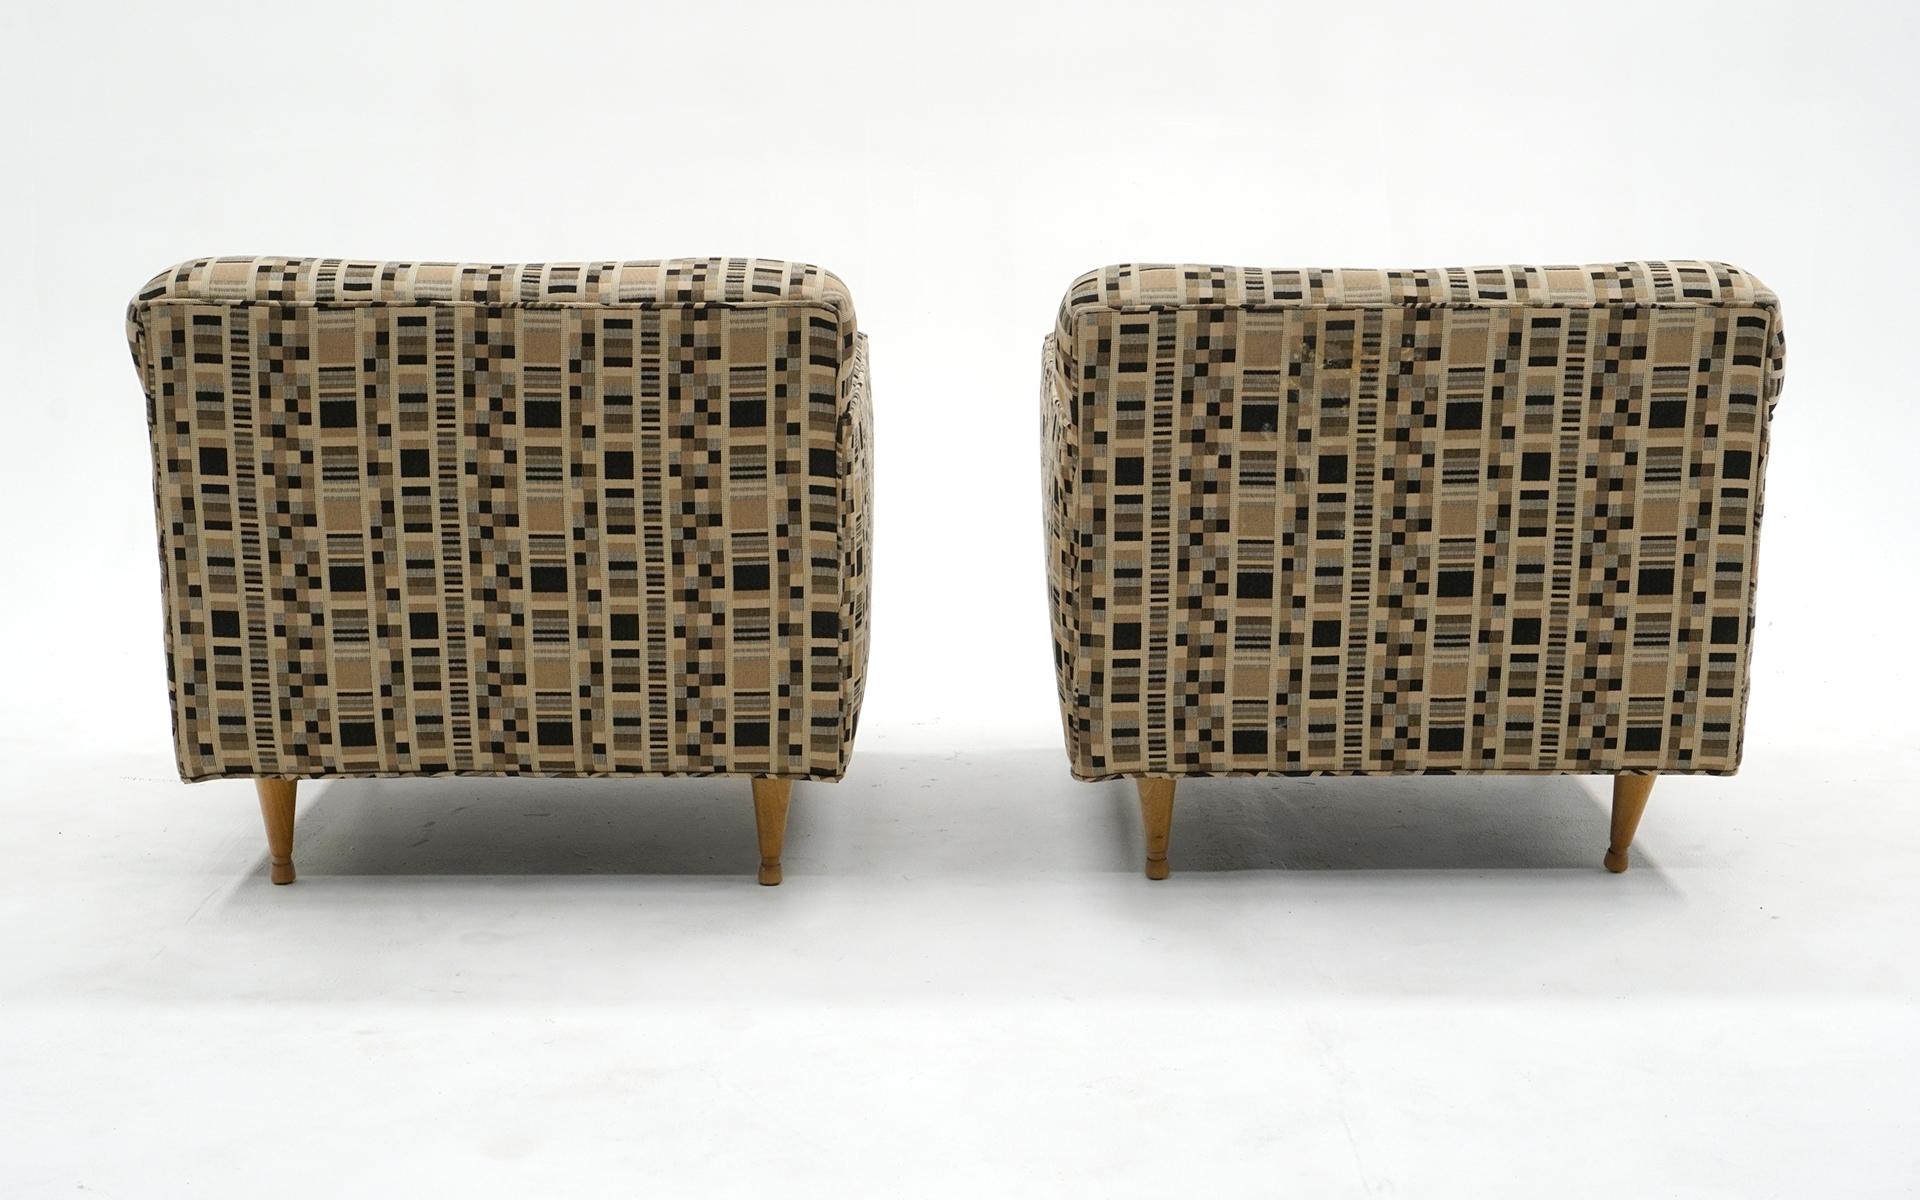 American Pair of Lounge Chairs by Edward Wormley for Dunbar, Priced for Reupholstery